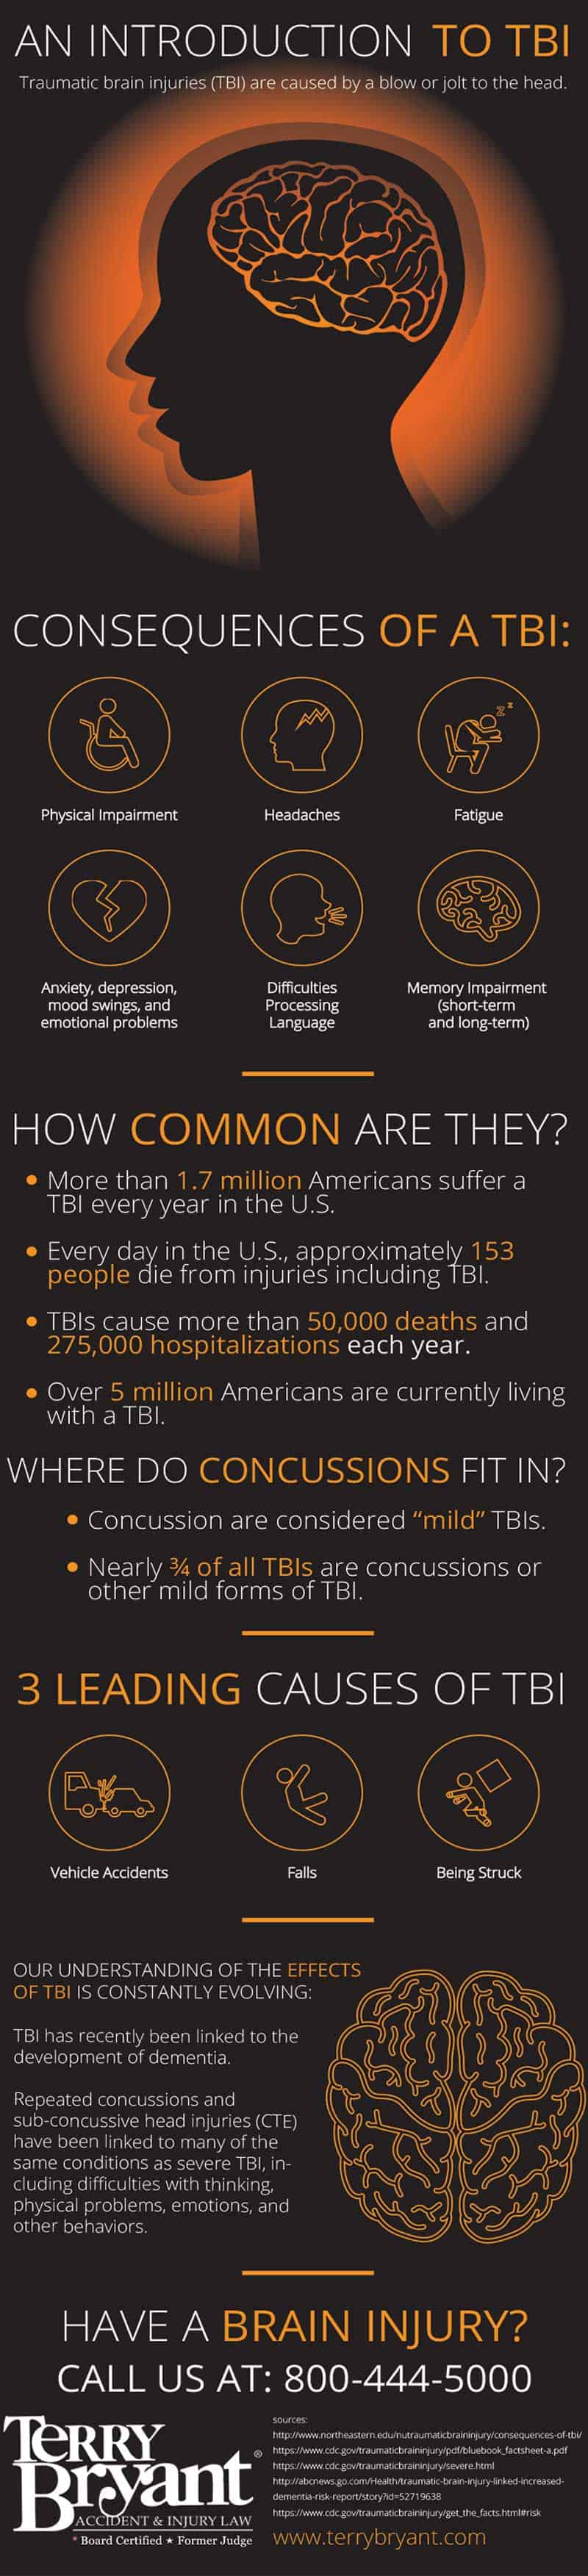 An Introduction To TBI Infographic